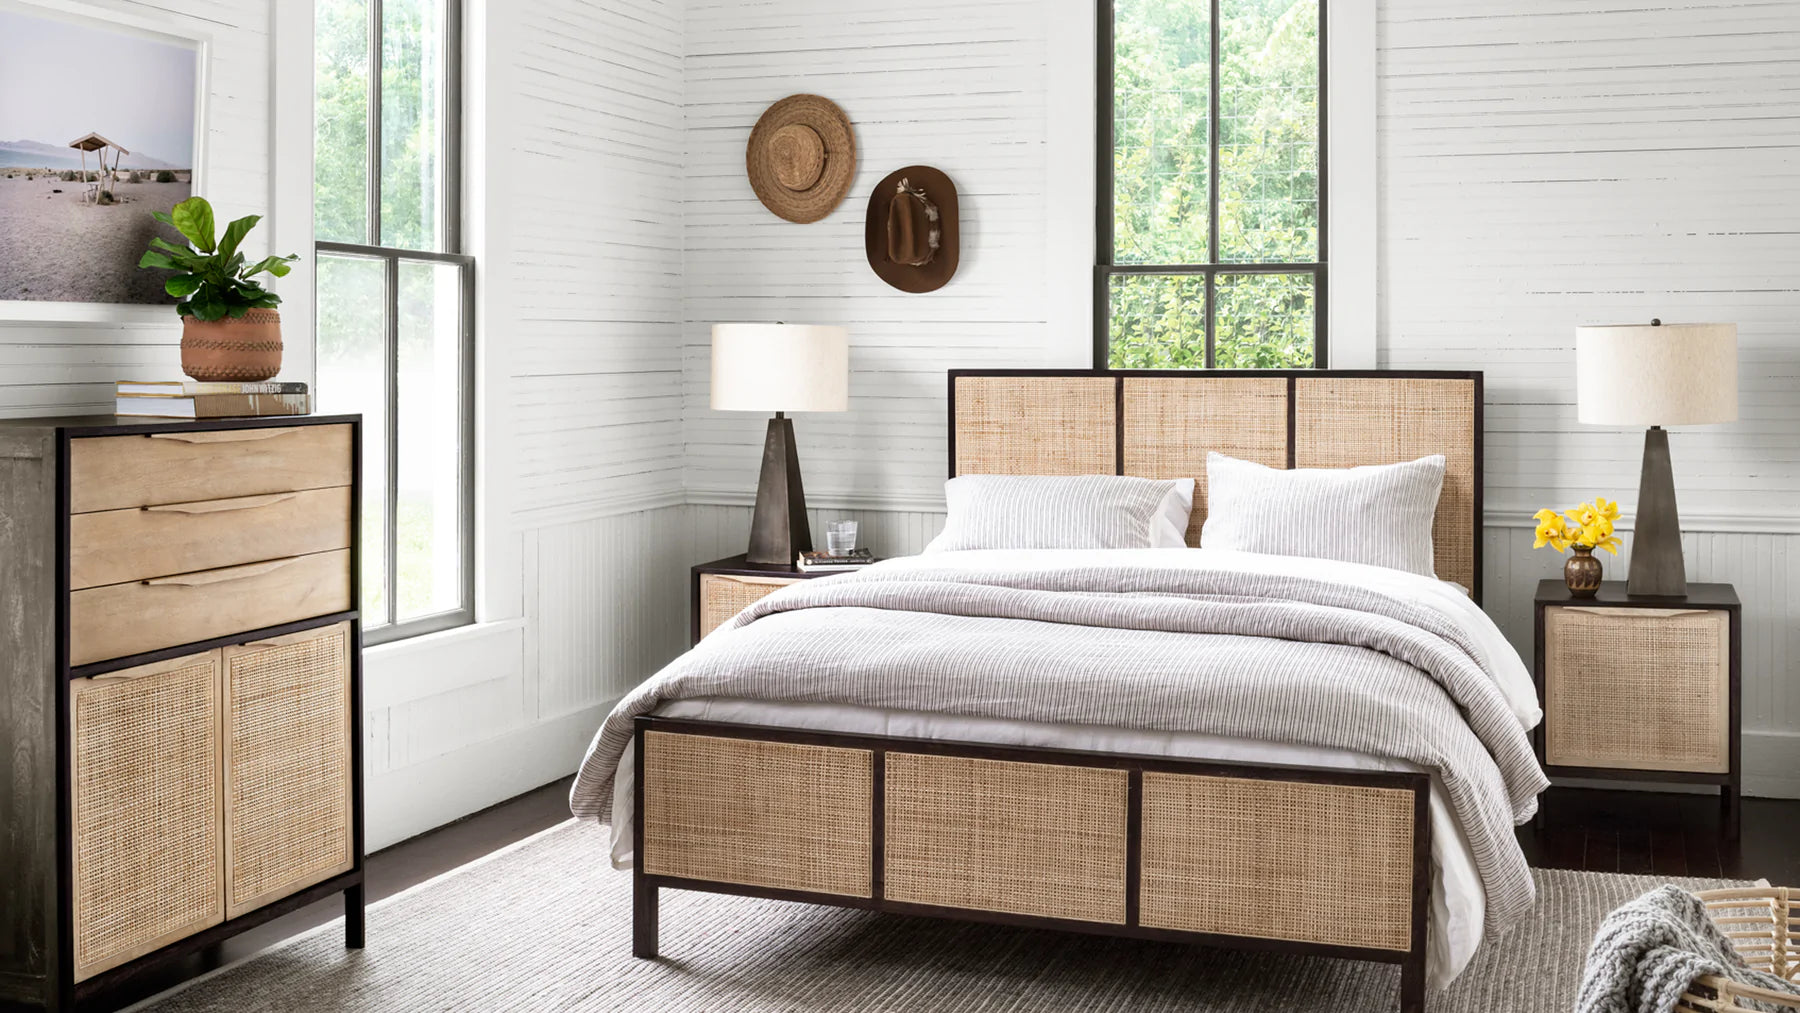 F&S Exclusives: Beds